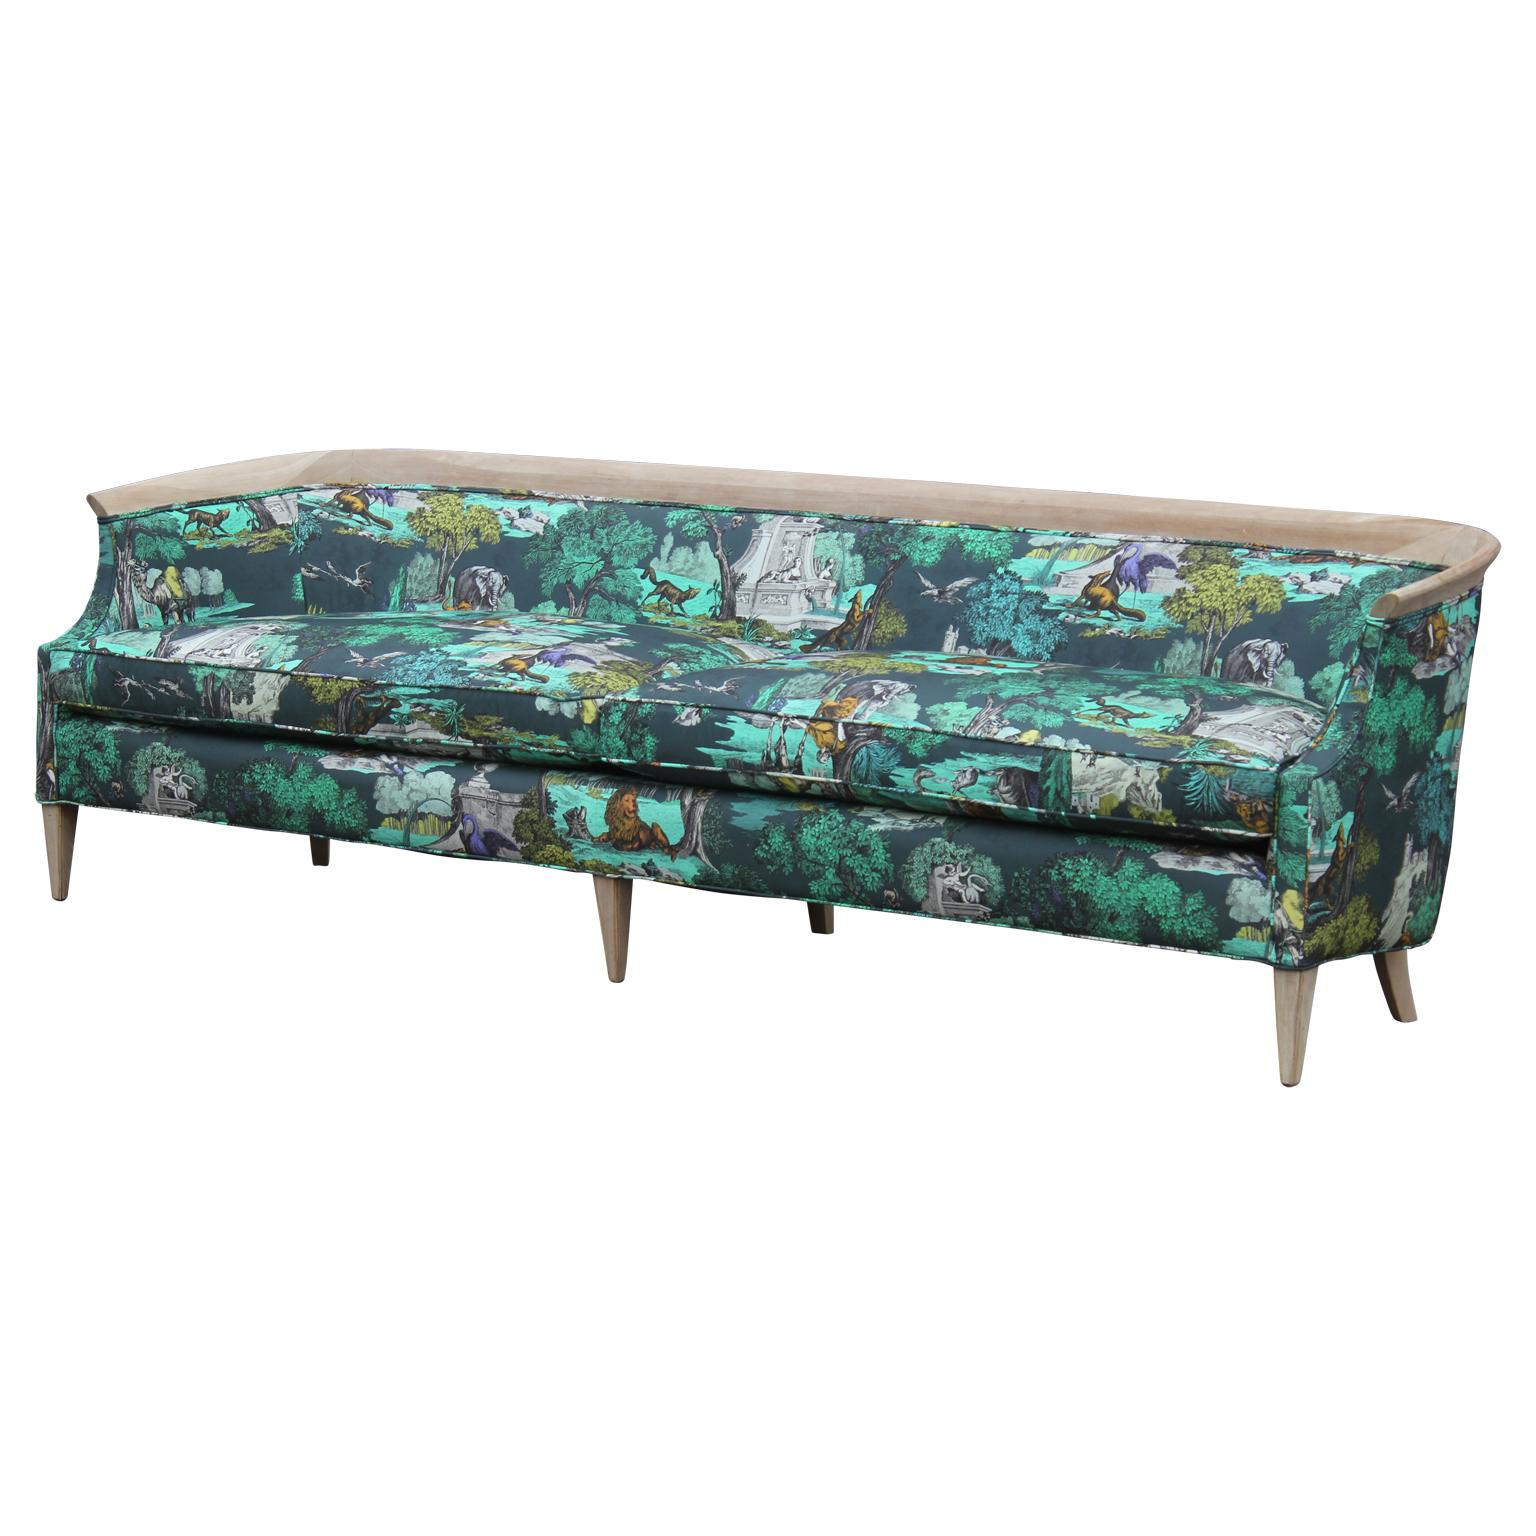 Stunning modern barrel back sofa with a bleached mahogany frame and freshly upholstered in a whimsical and colorful blue / green / yellow Cole & Son 